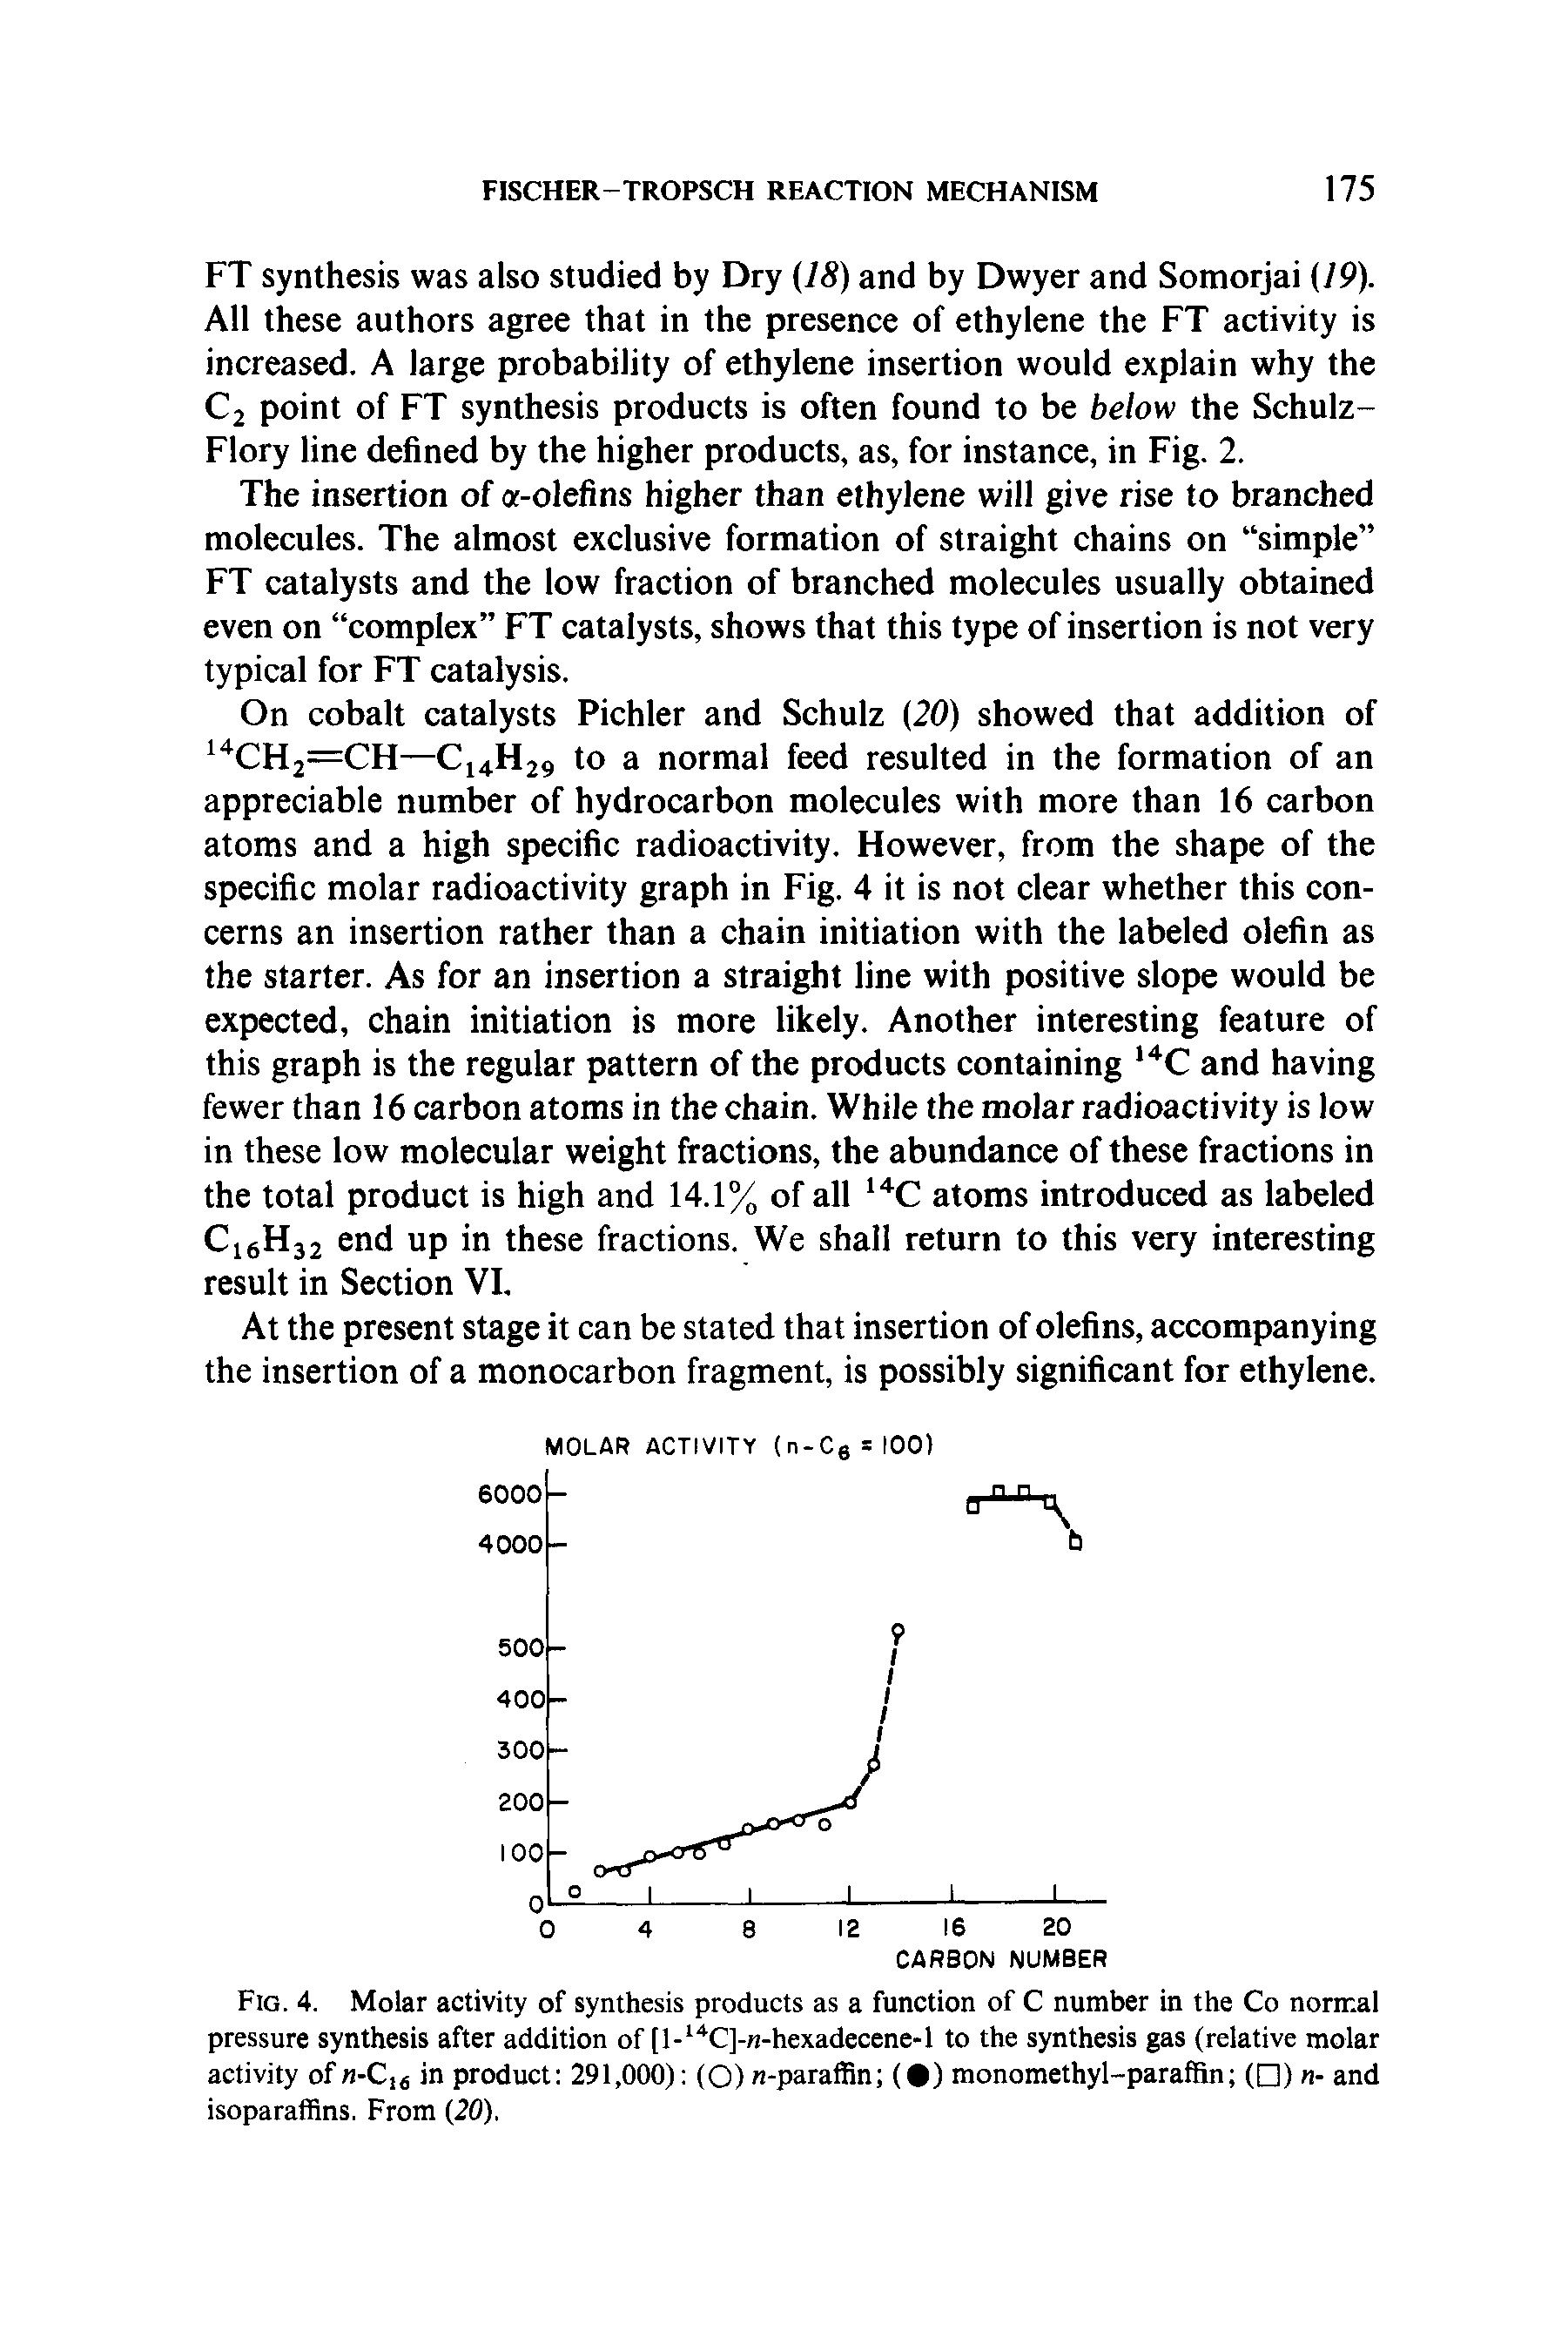 Fig. 4. Molar activity of synthesis products as a function of C number in the Co normal pressure synthesis after addition of [l- C]-n-hexadecene-l to the synthesis gas (relative molar activity of -C,4 in product 291,000) (O) n-paraffin ( ) monomethyl-paraffin ( ) n- and isoparaffins. From (20).